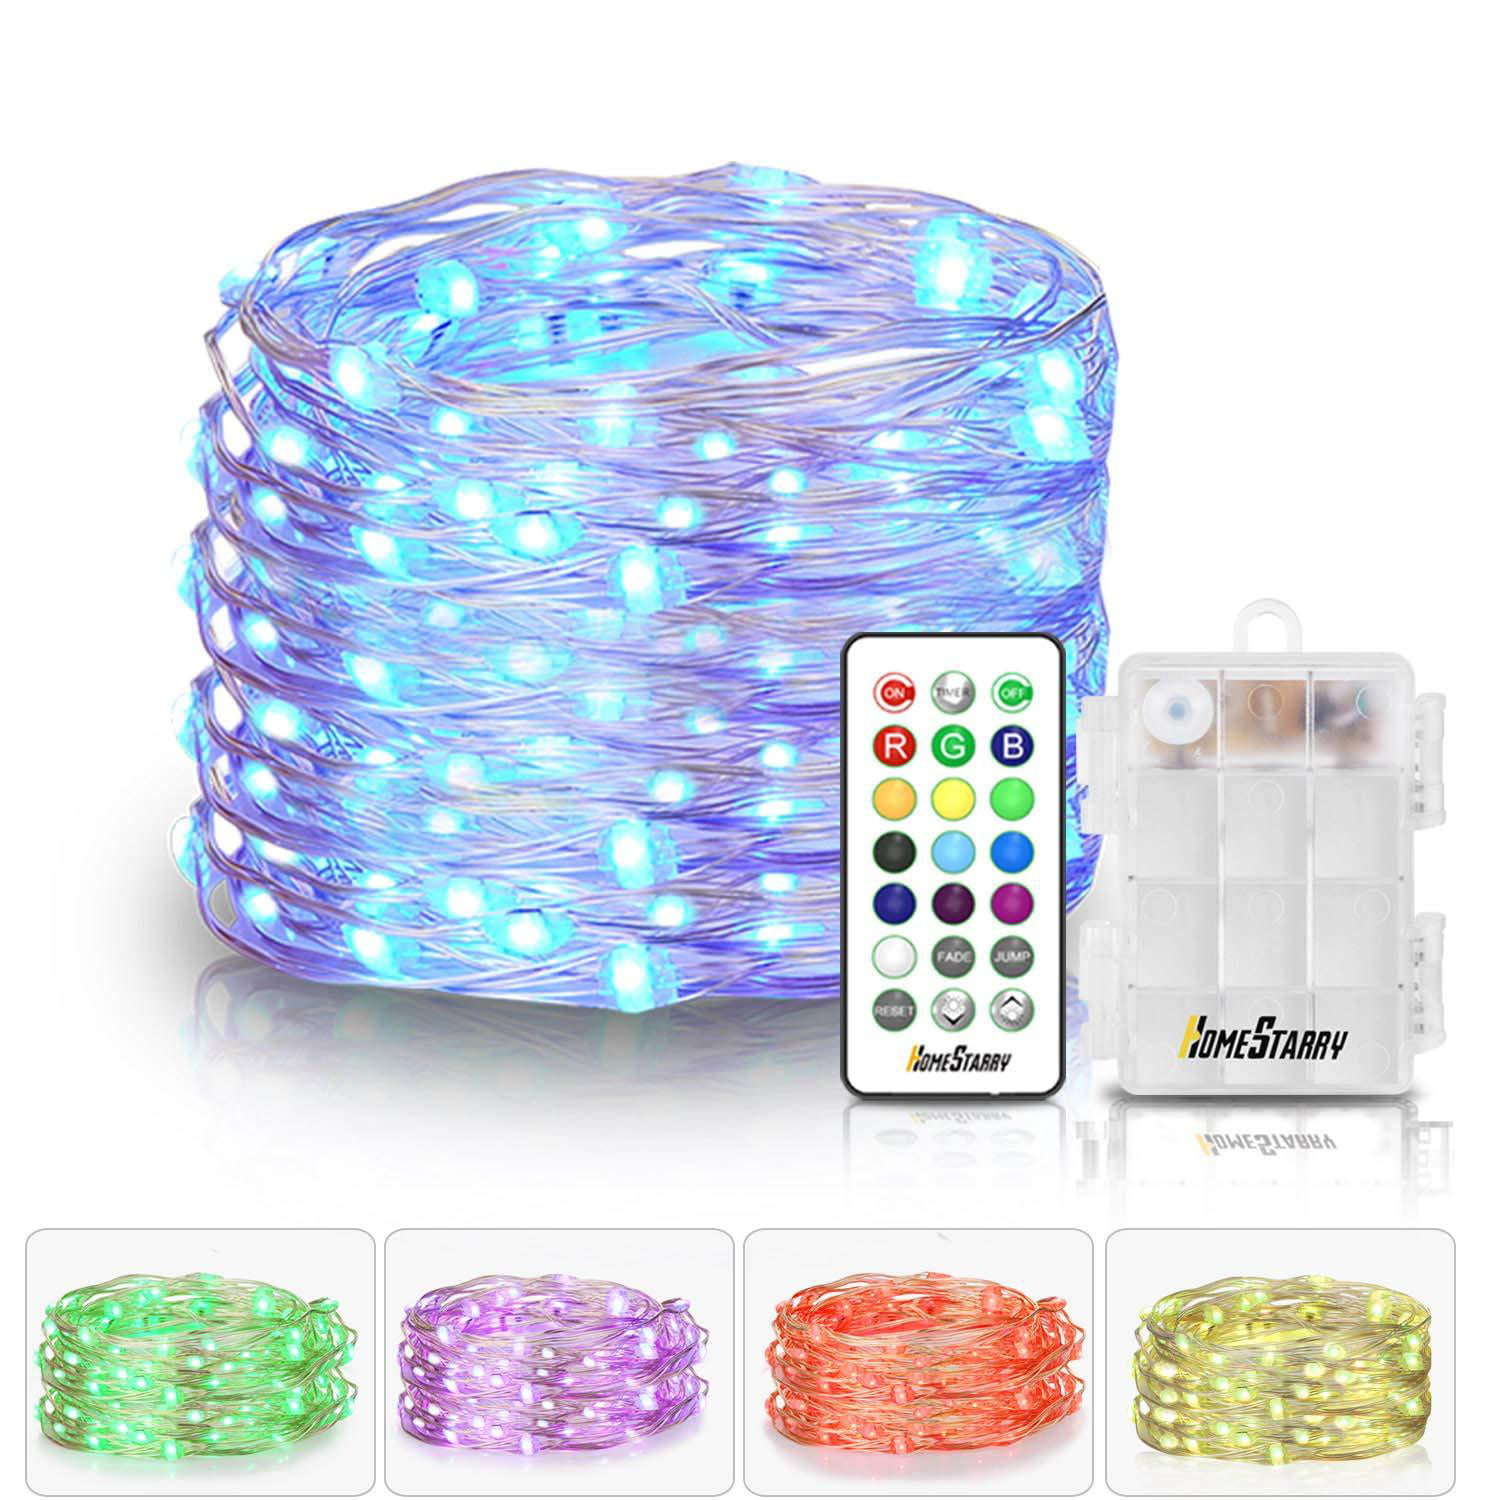 Multicolor Led Fairy String Lights 5M 50LEDs Battery Operated Remote Control New 